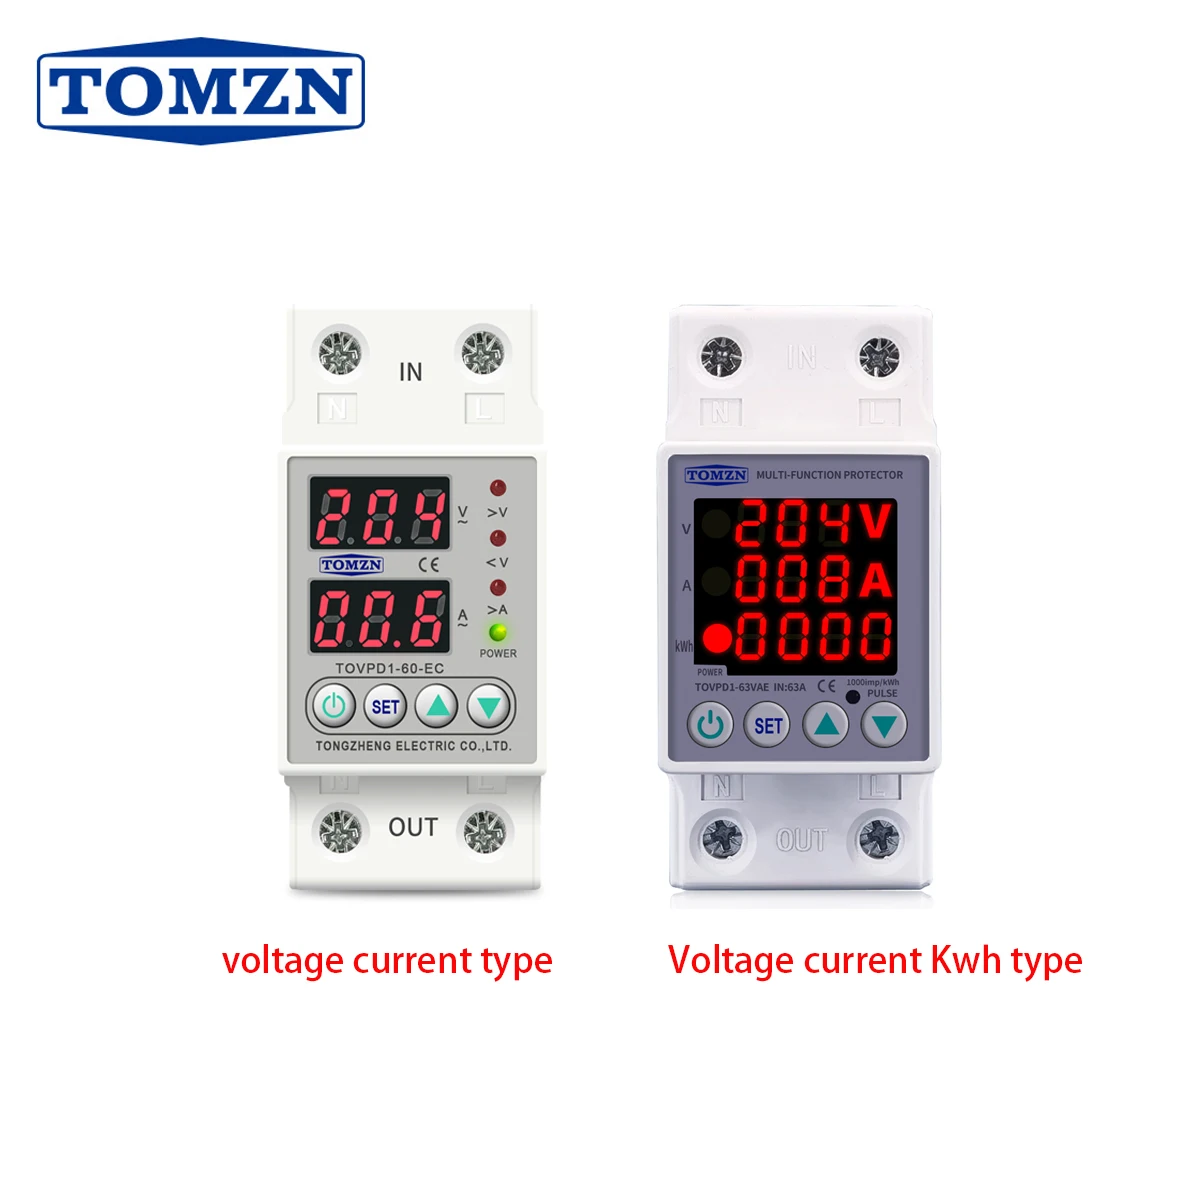 TOMZN Din Rail Dual Display Adjustable Over Under Voltage Current Protective Device Protector Relay 40A 63A 80A 100A 220V 230V